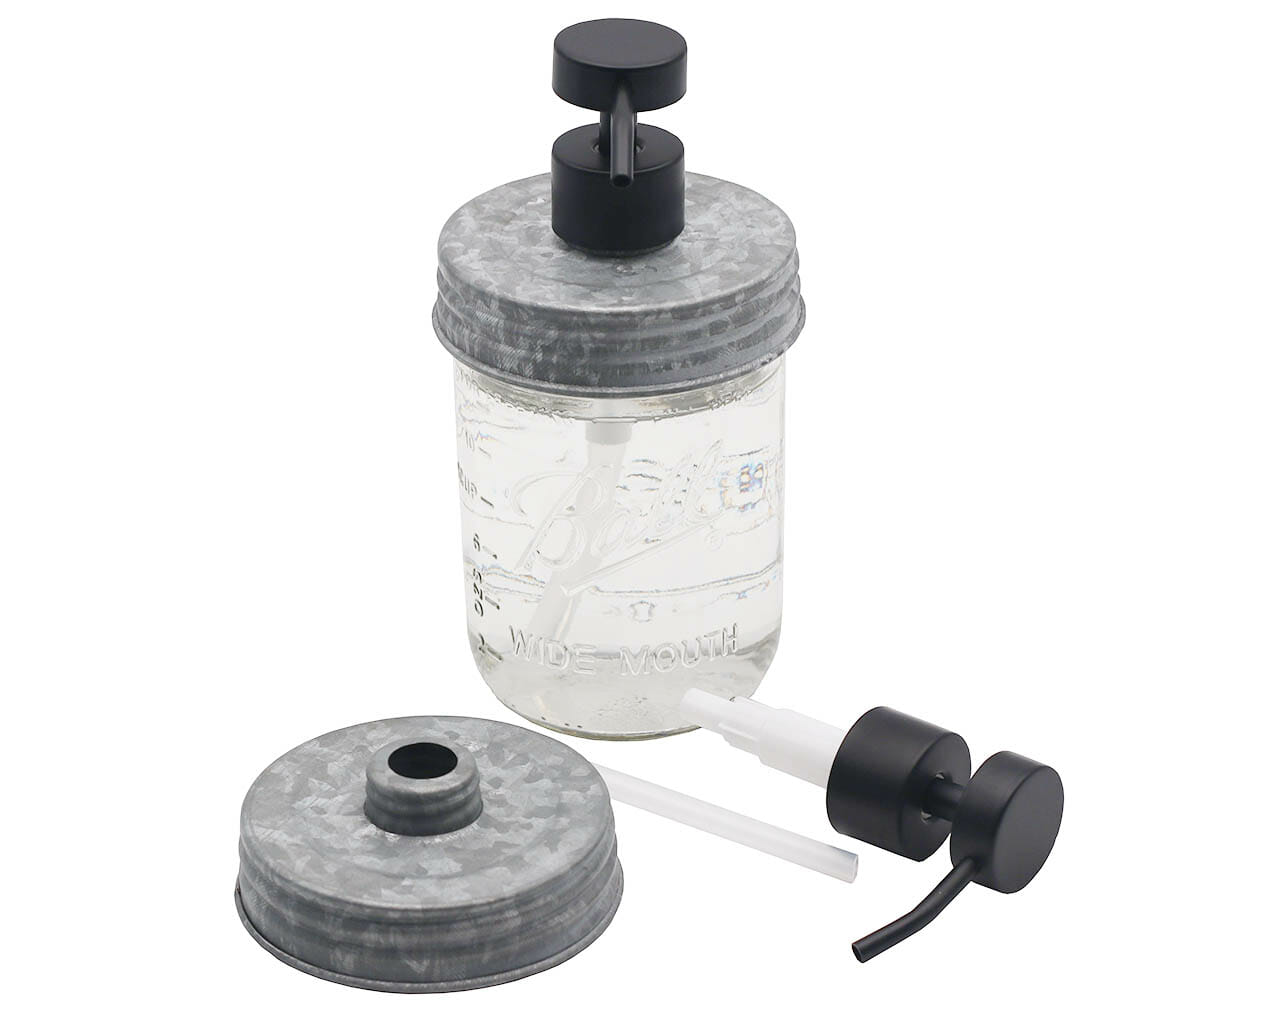 Threaded Matte Charcoal Black Soap Dispenser with Galvanized Lid for Wide Mouth Mason Jars Style #2